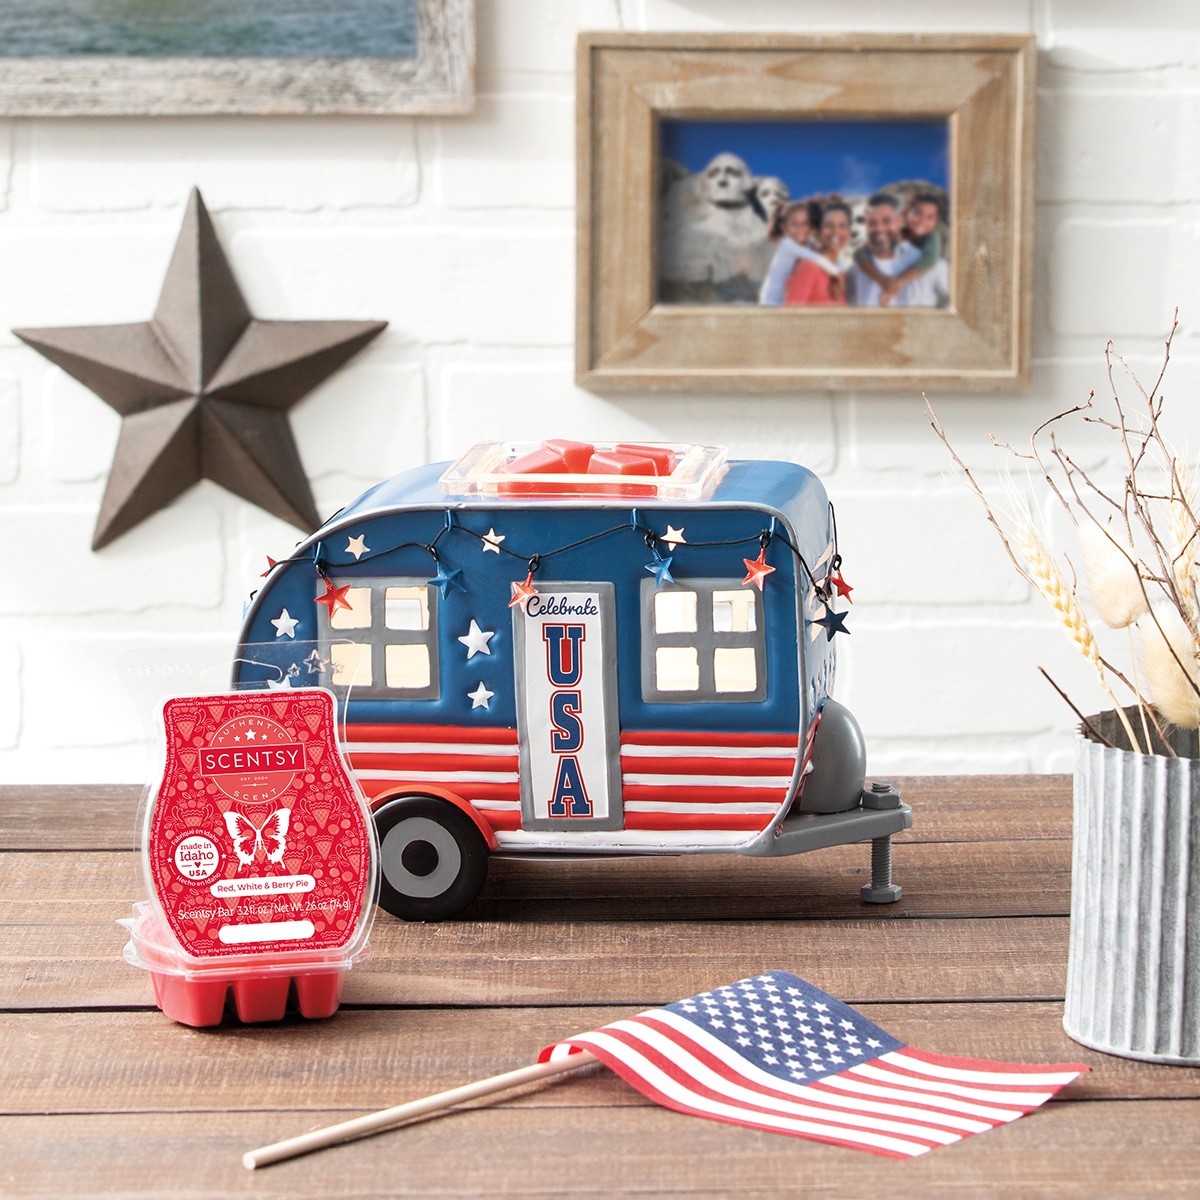 th of july scentsy camper styled